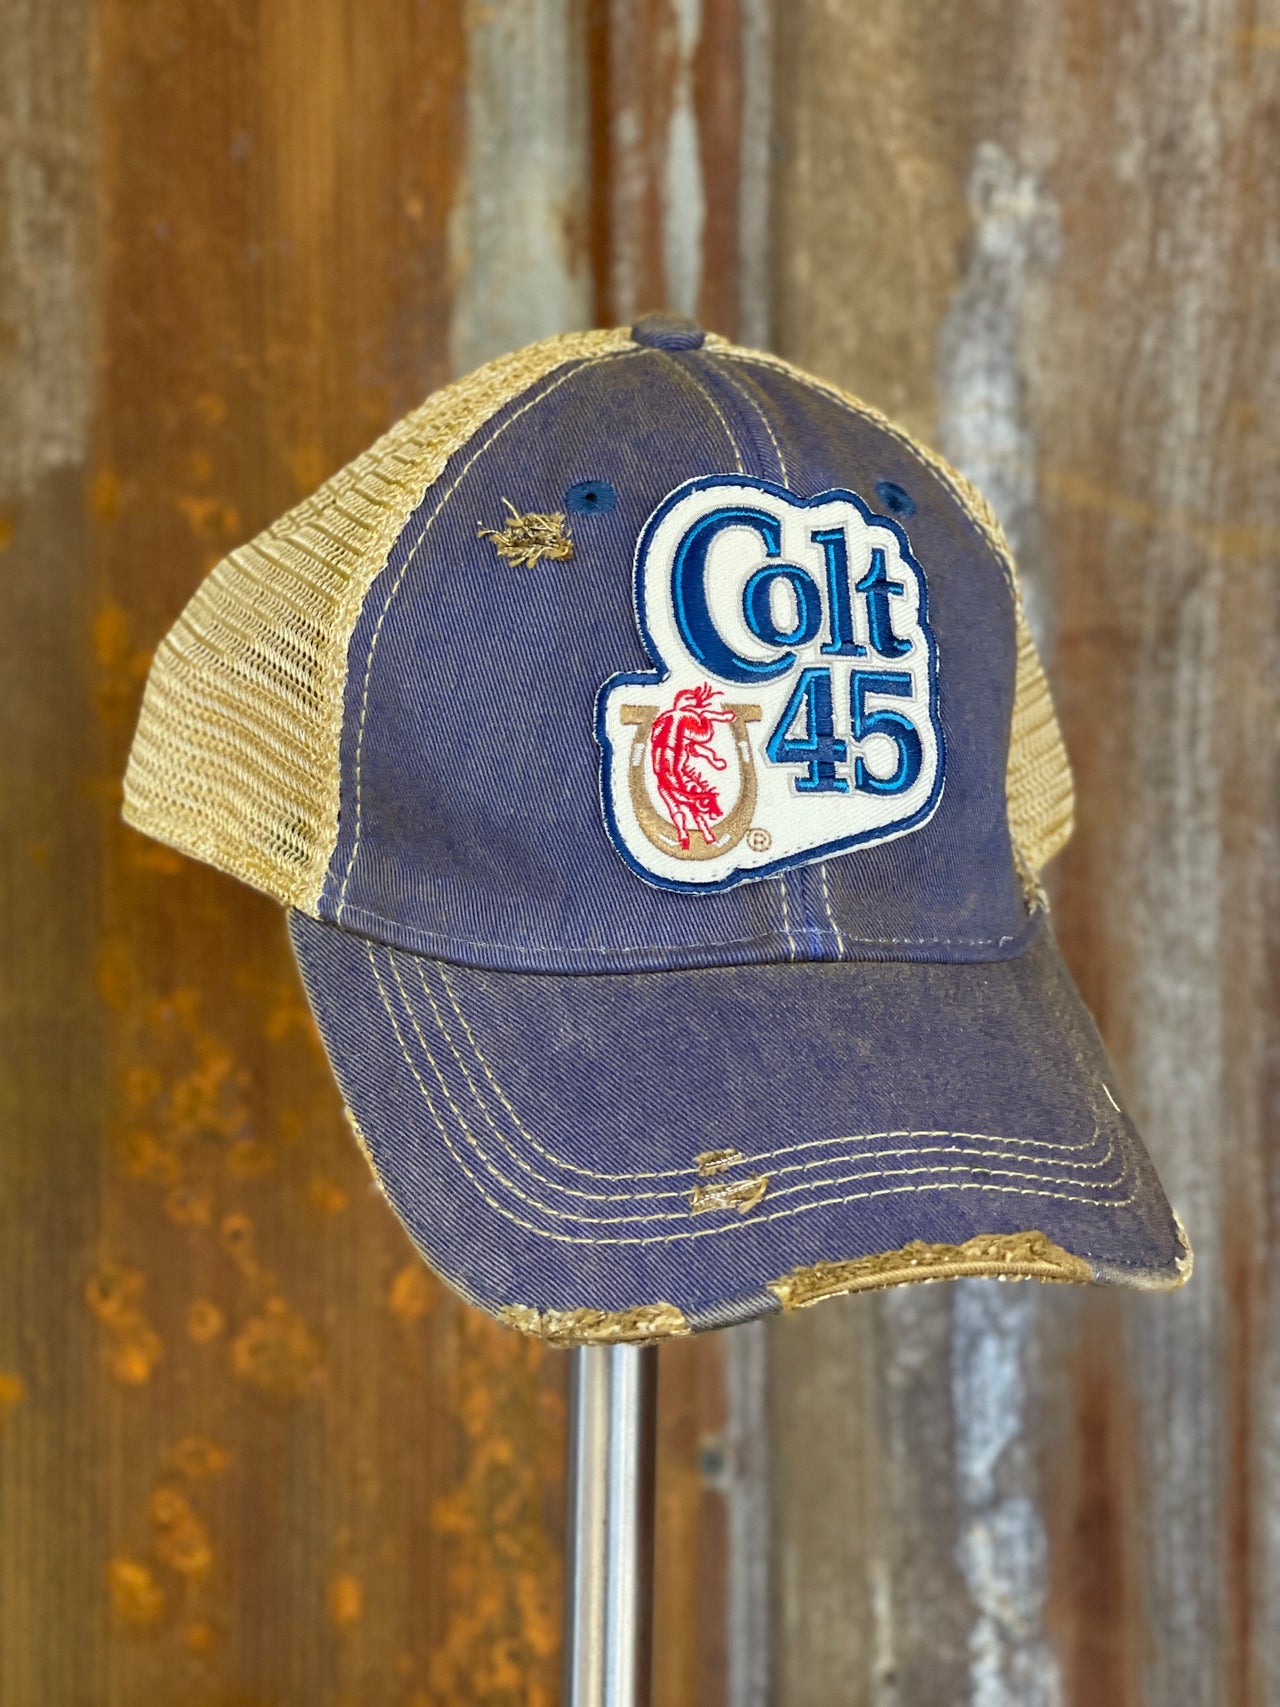 Colt 45 beer hats at Angry Minnow Vintage